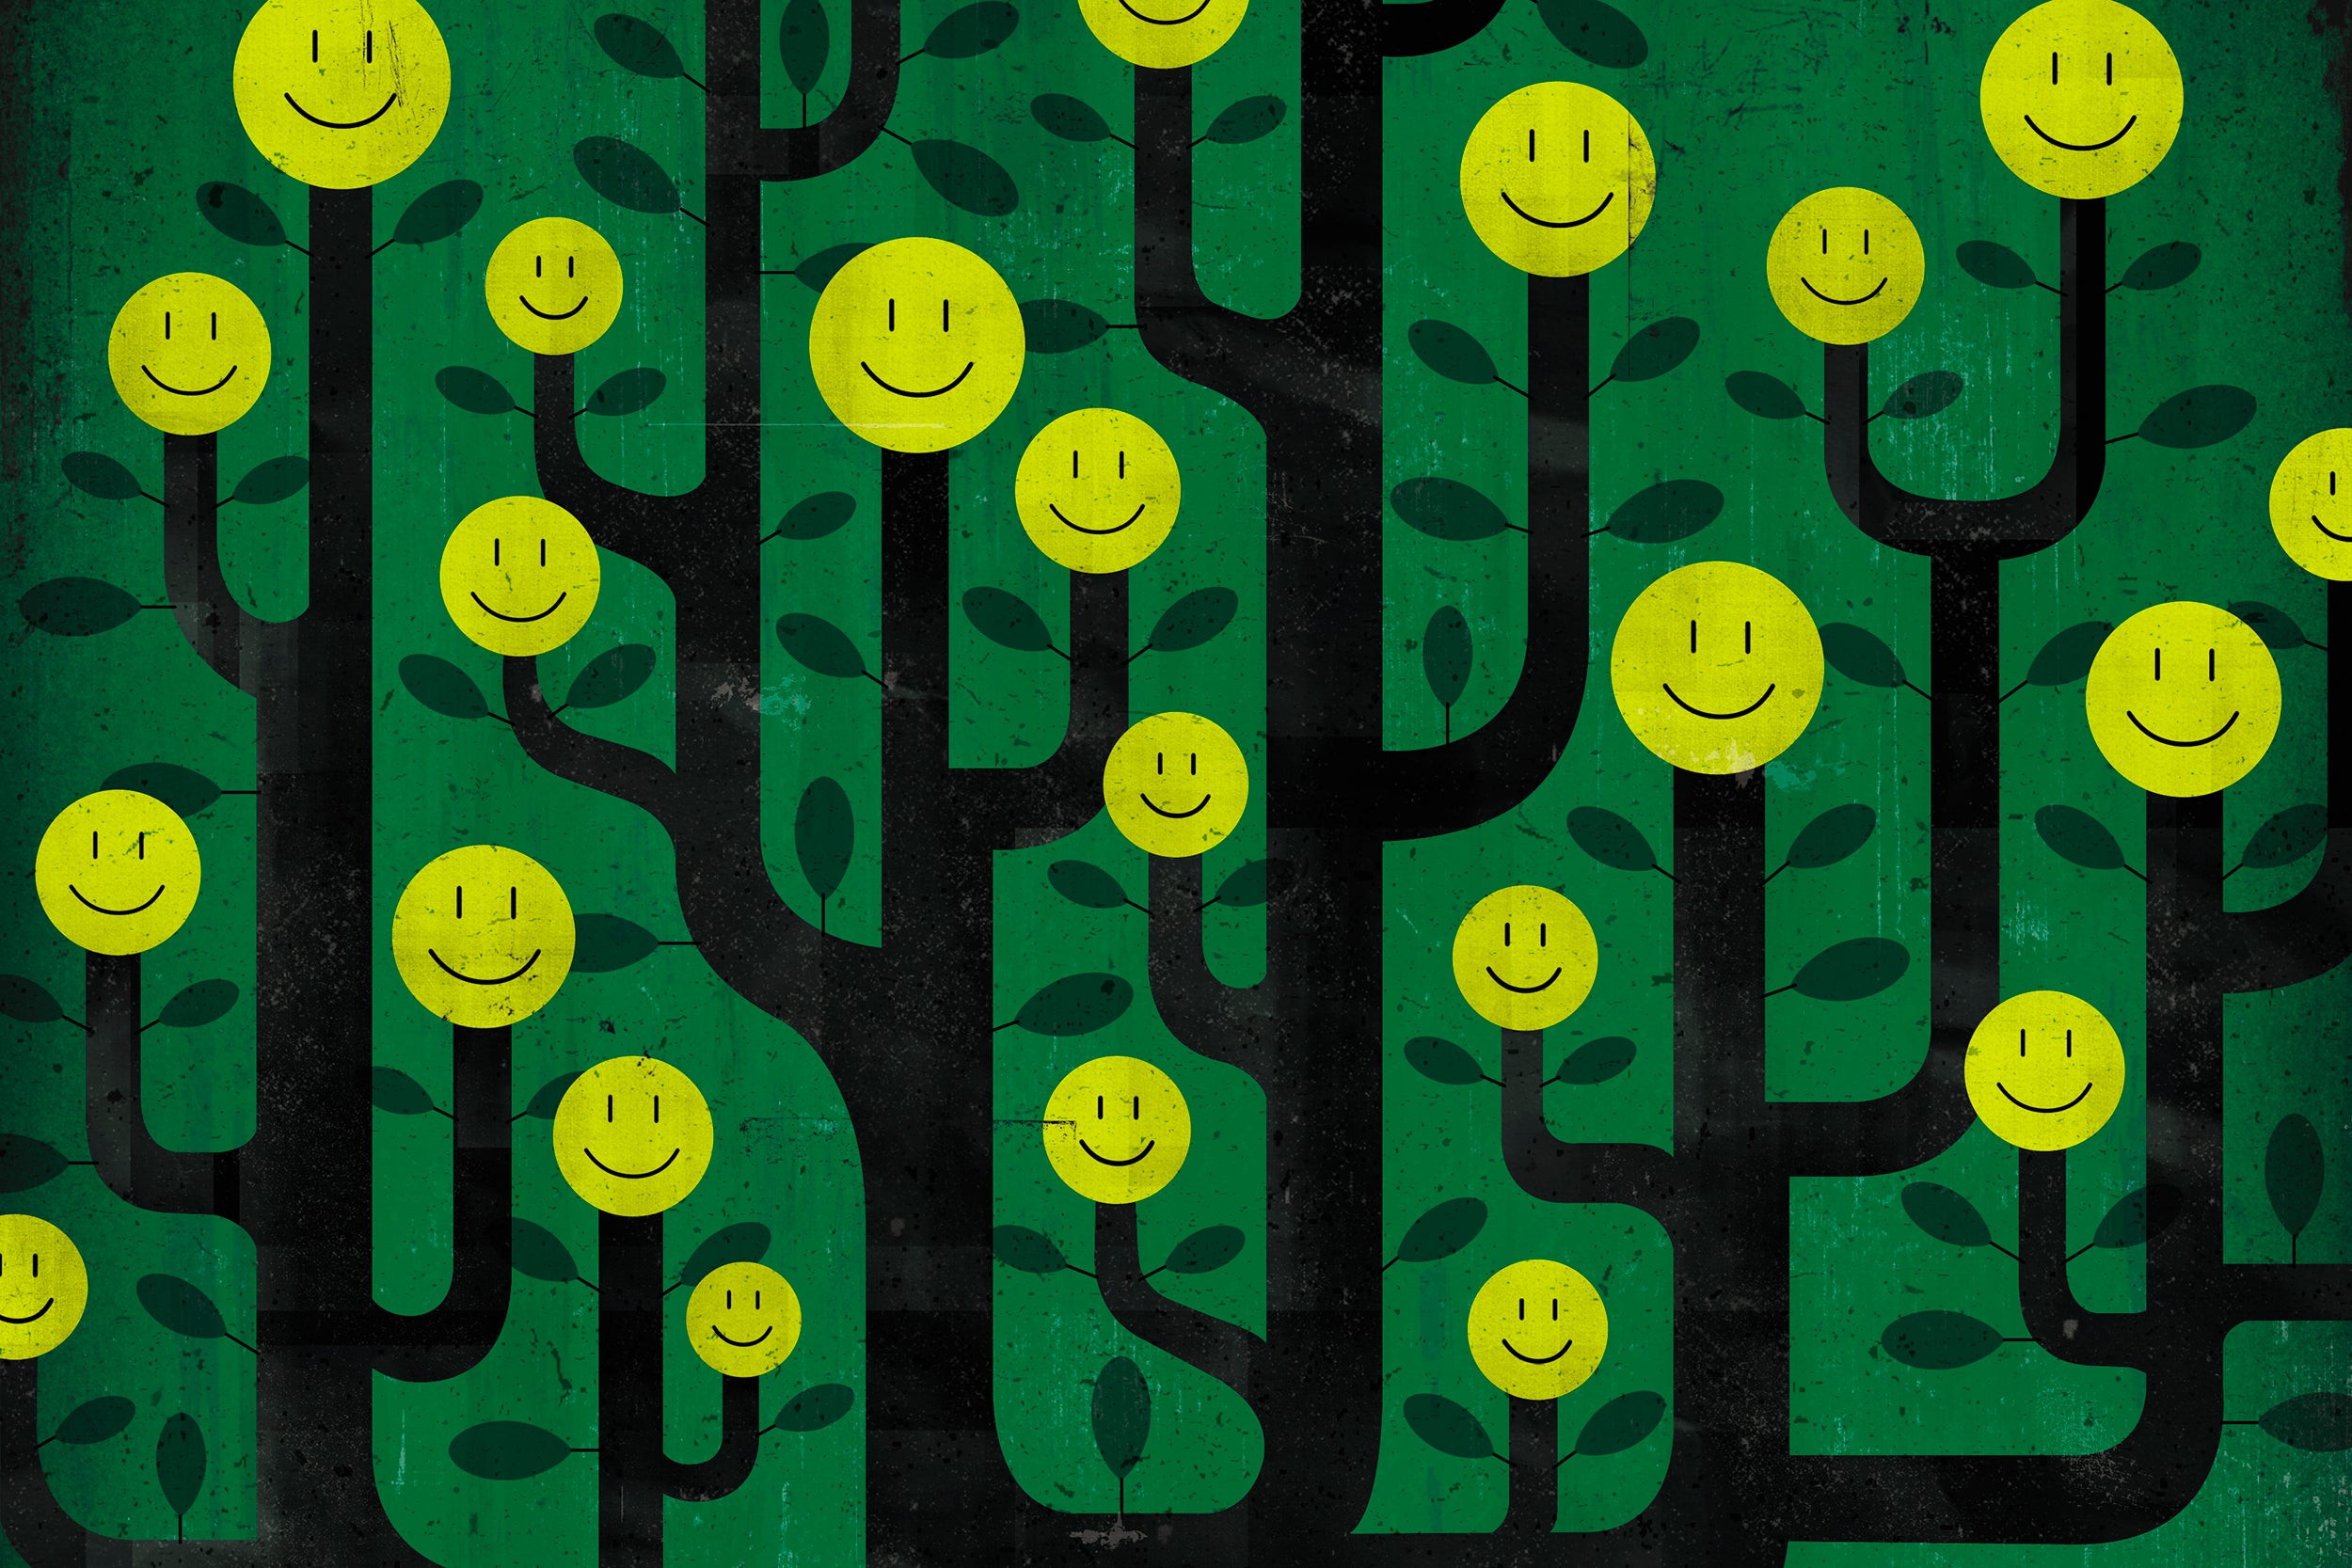 Illustration of smiling faces growing on trees. (Illustration by Davor Pavelic/Ikon Images)